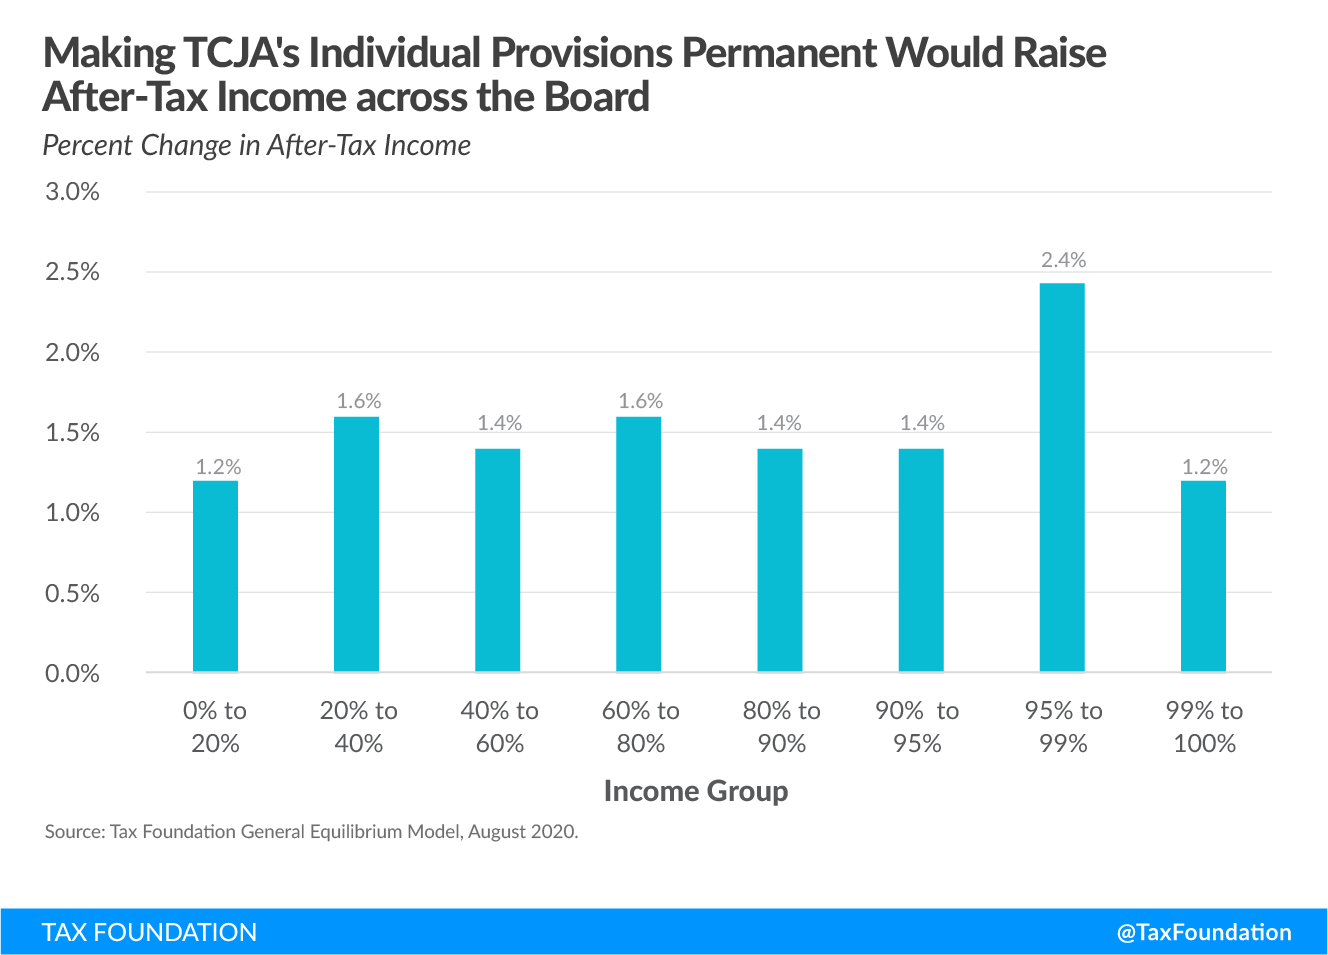 Making the Tax Cuts and Jobs Act TCJA individual provisions permanent would raise after-tax income across the board